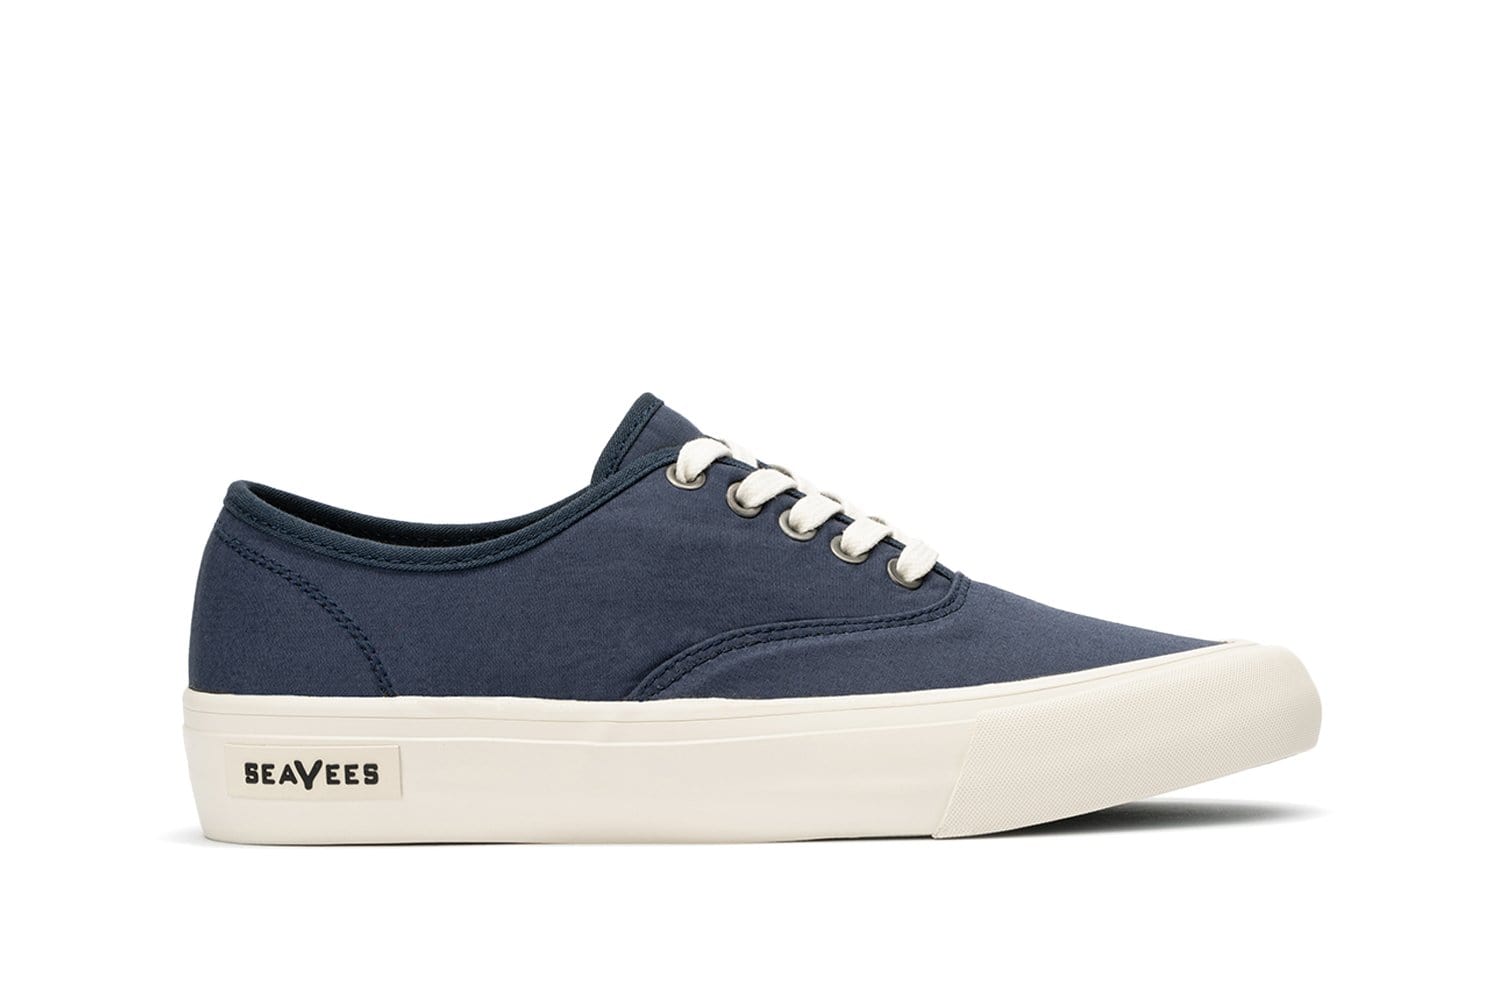 SeaVees Sneakers are Perfect for Your Spring OOTDs